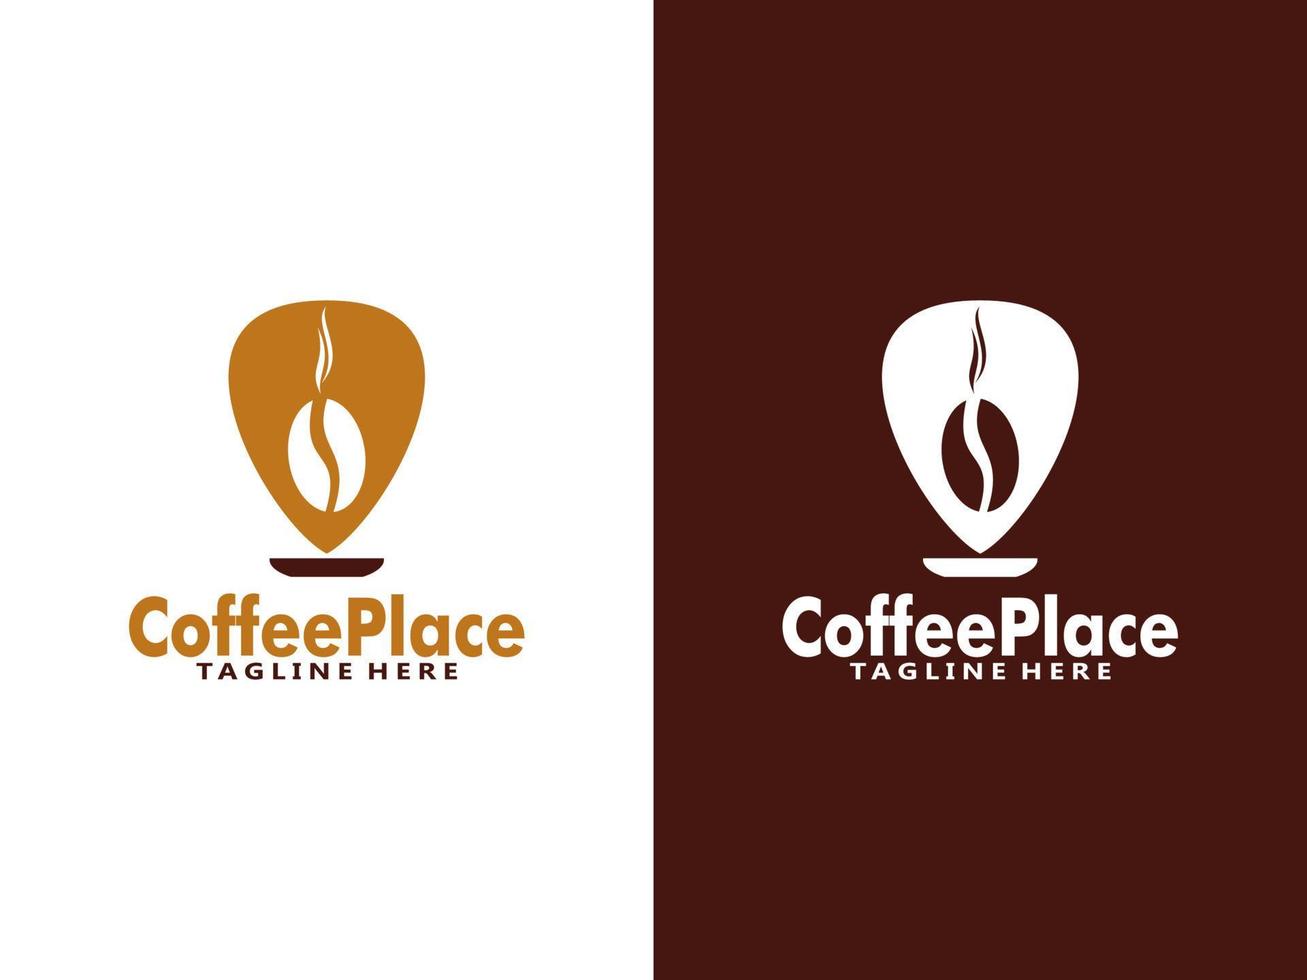 Coffee place logo design template, Vector coffee logo for coffee shop and any business related to coffee.